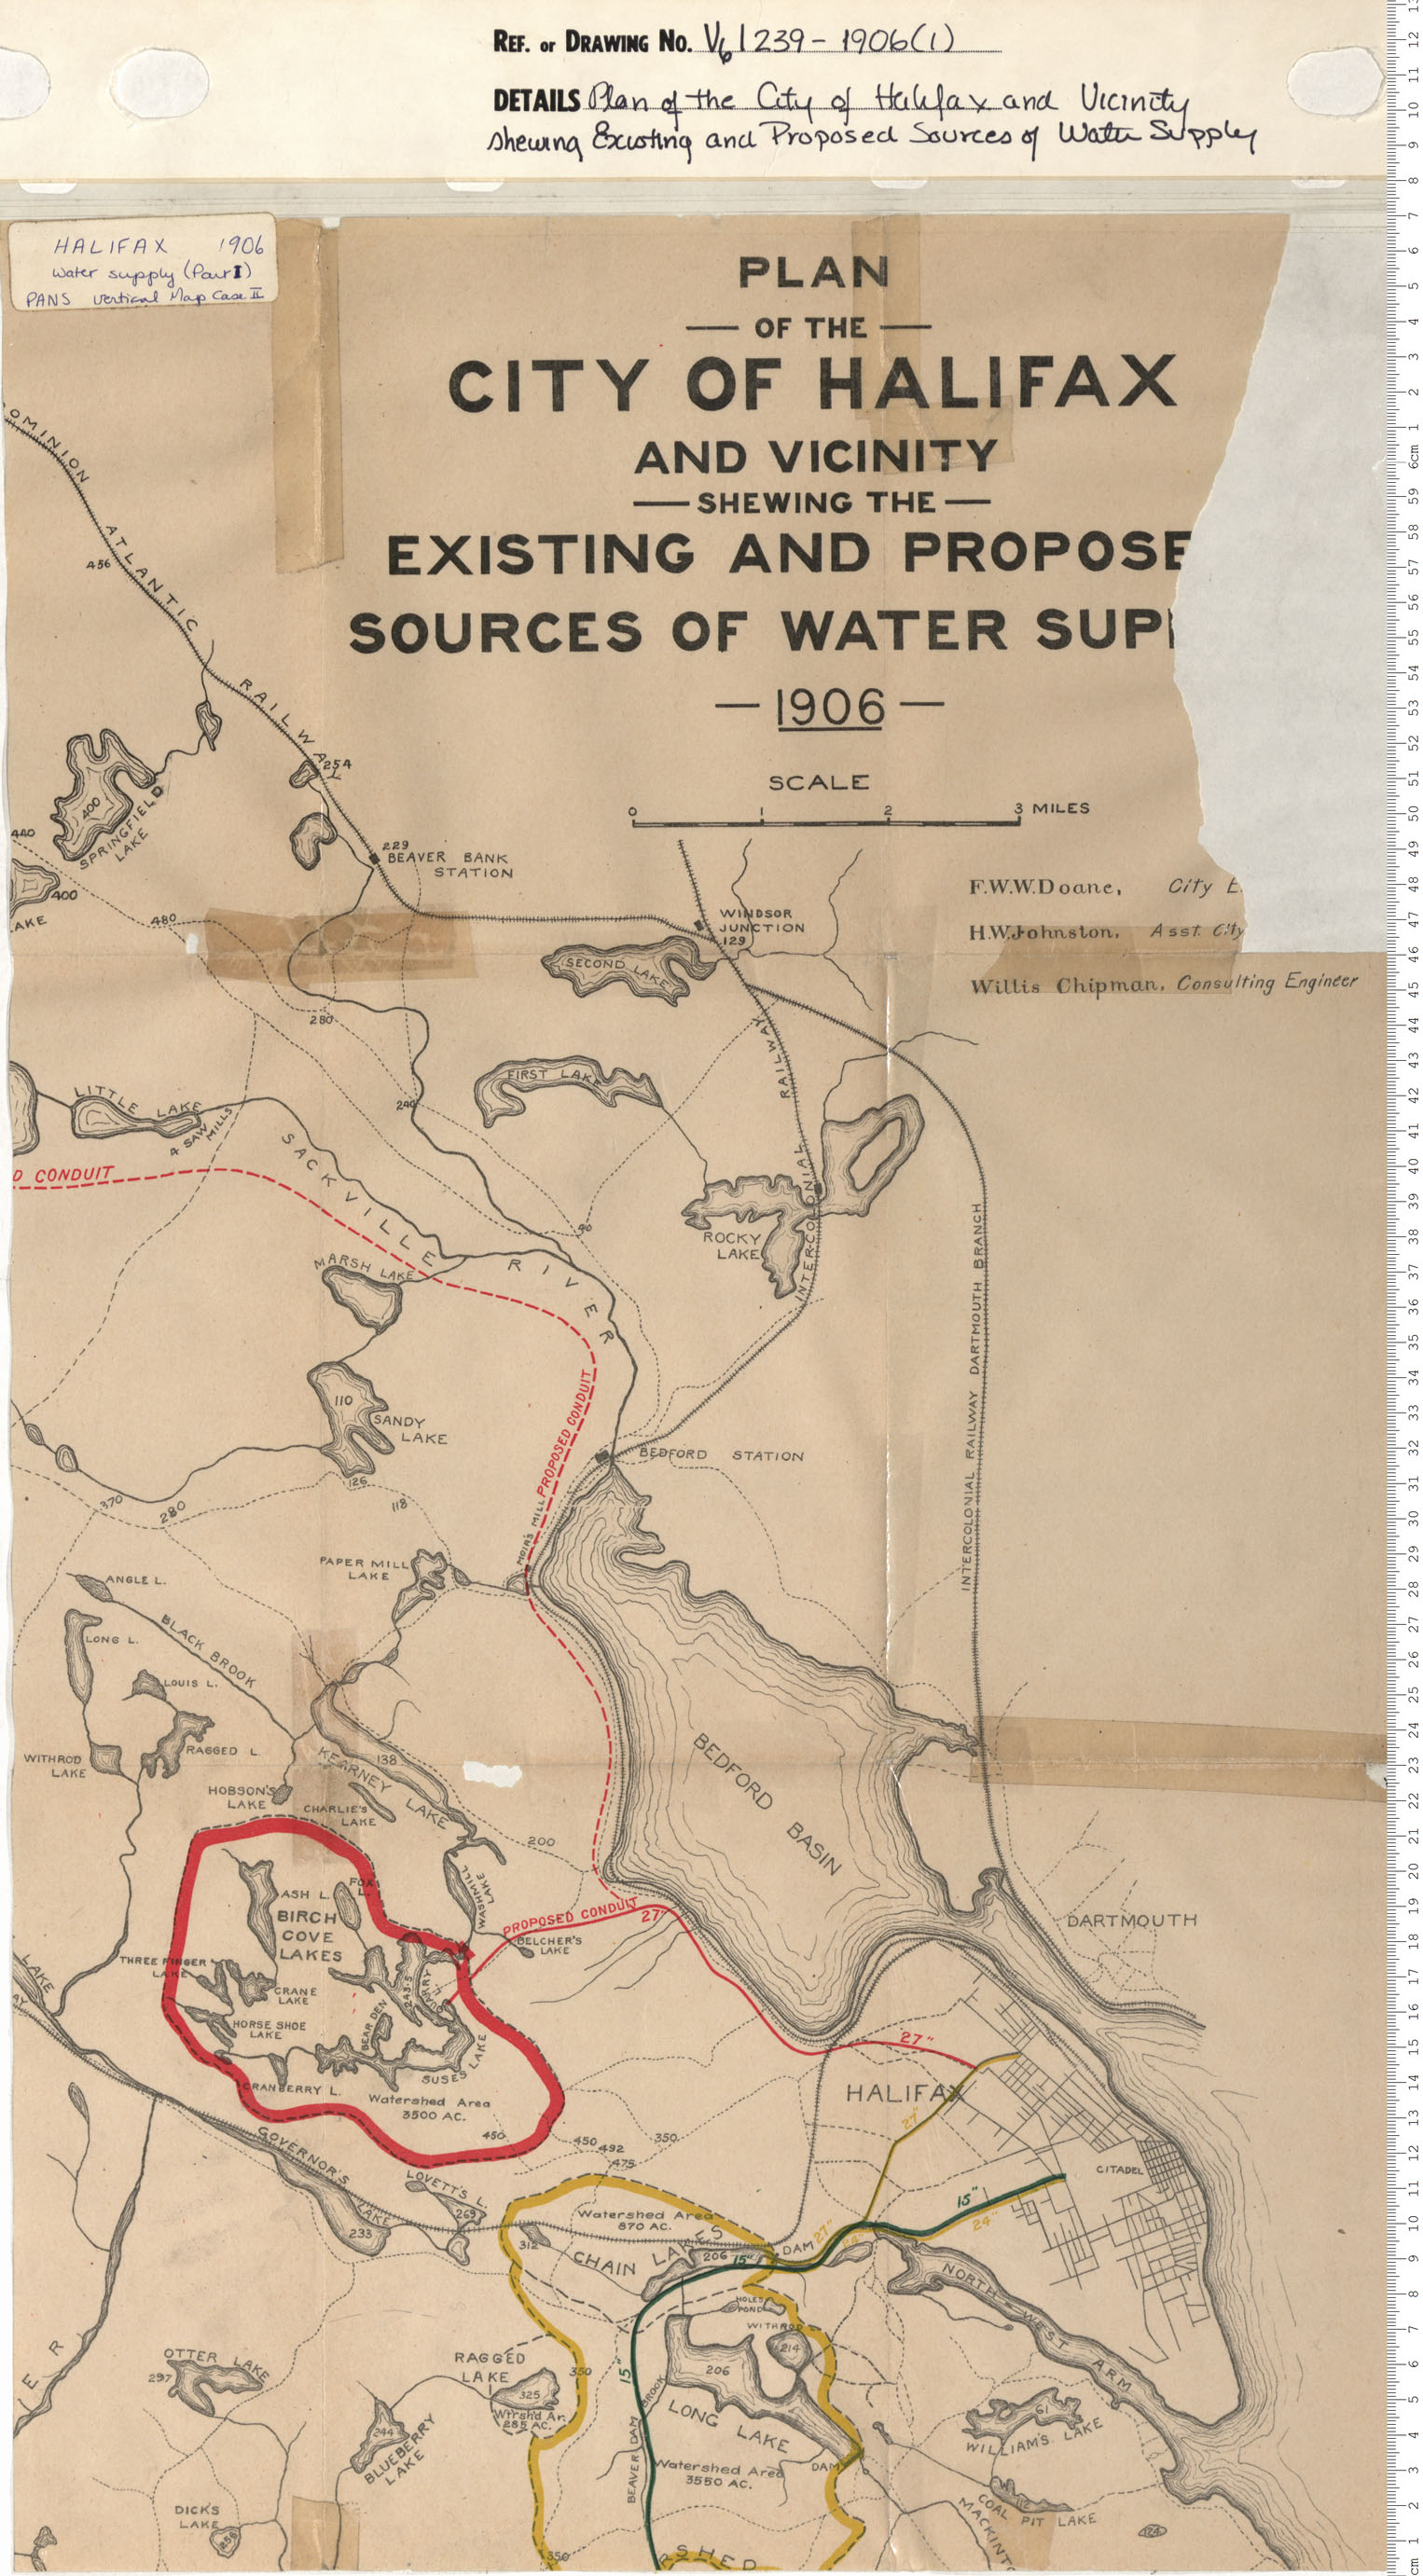 Plan of the City of Halifax and vicinity Showing the Existing and Propsed Sources of Water supply